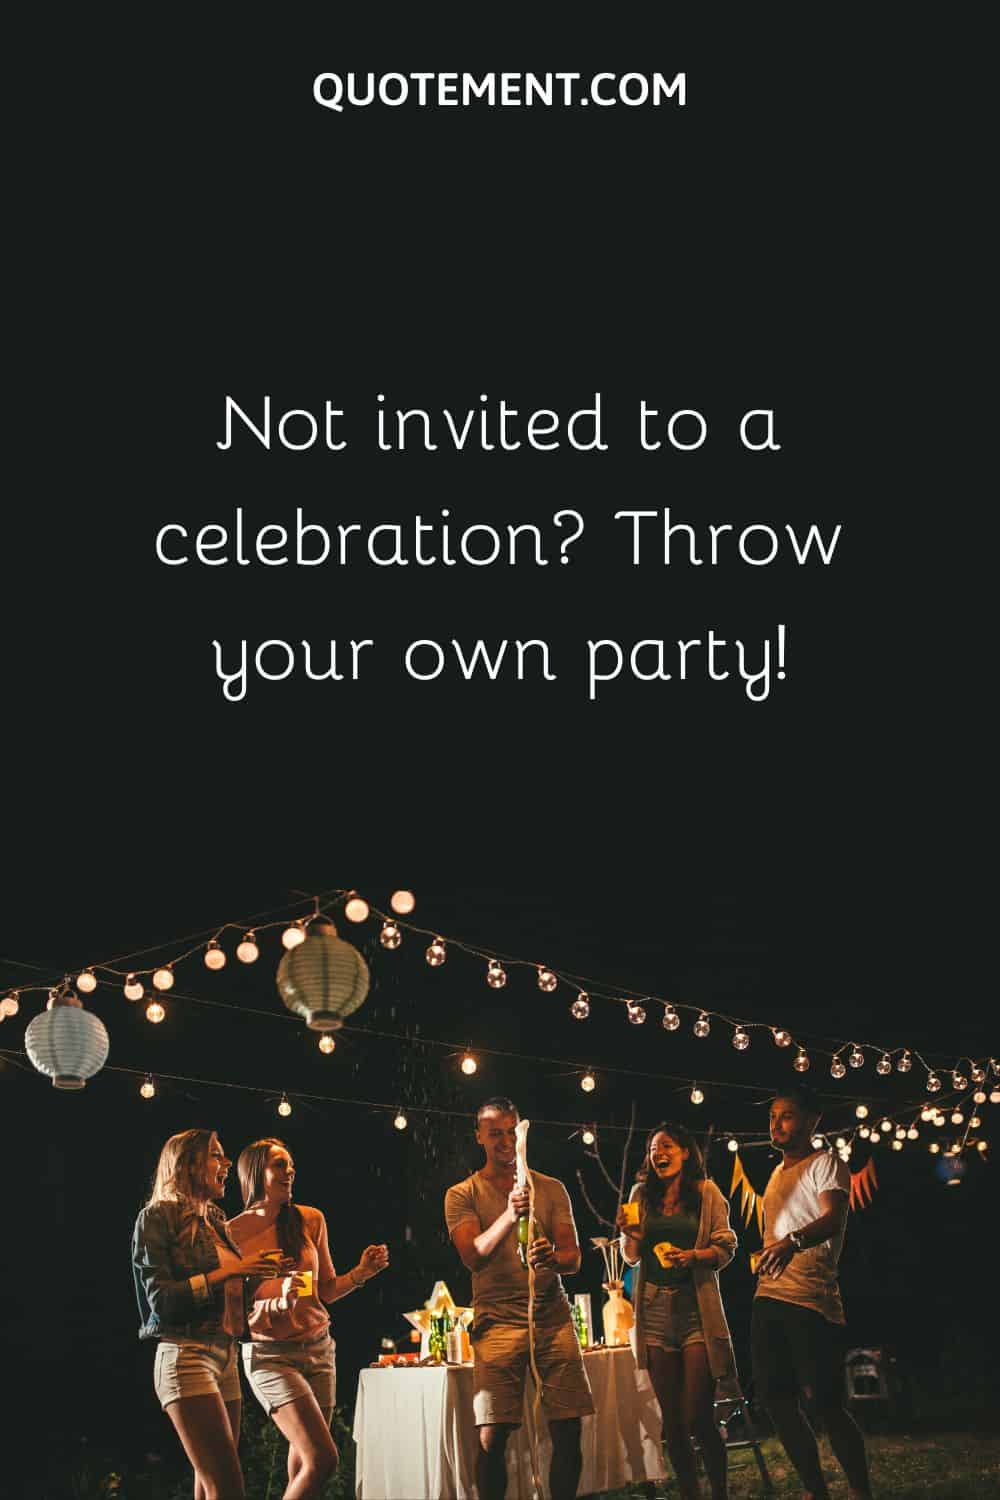 Not invited to a celebration